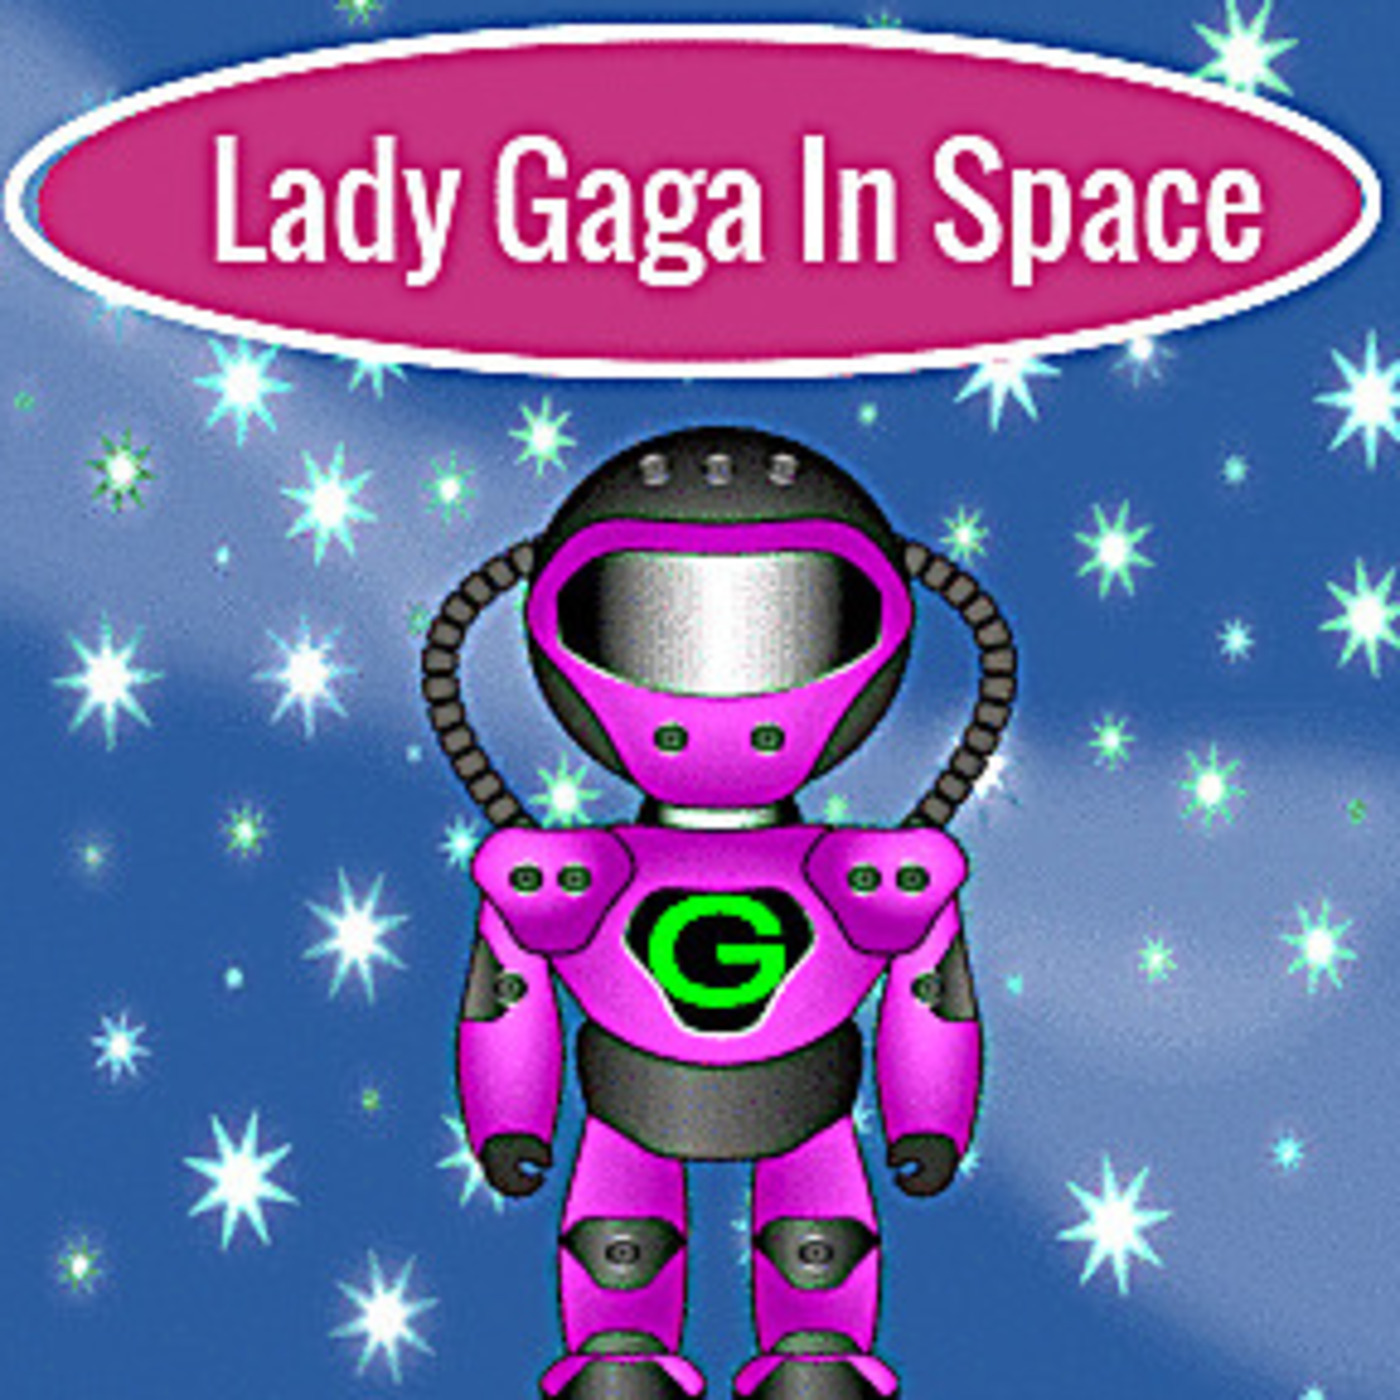 Lady Gaga In Space